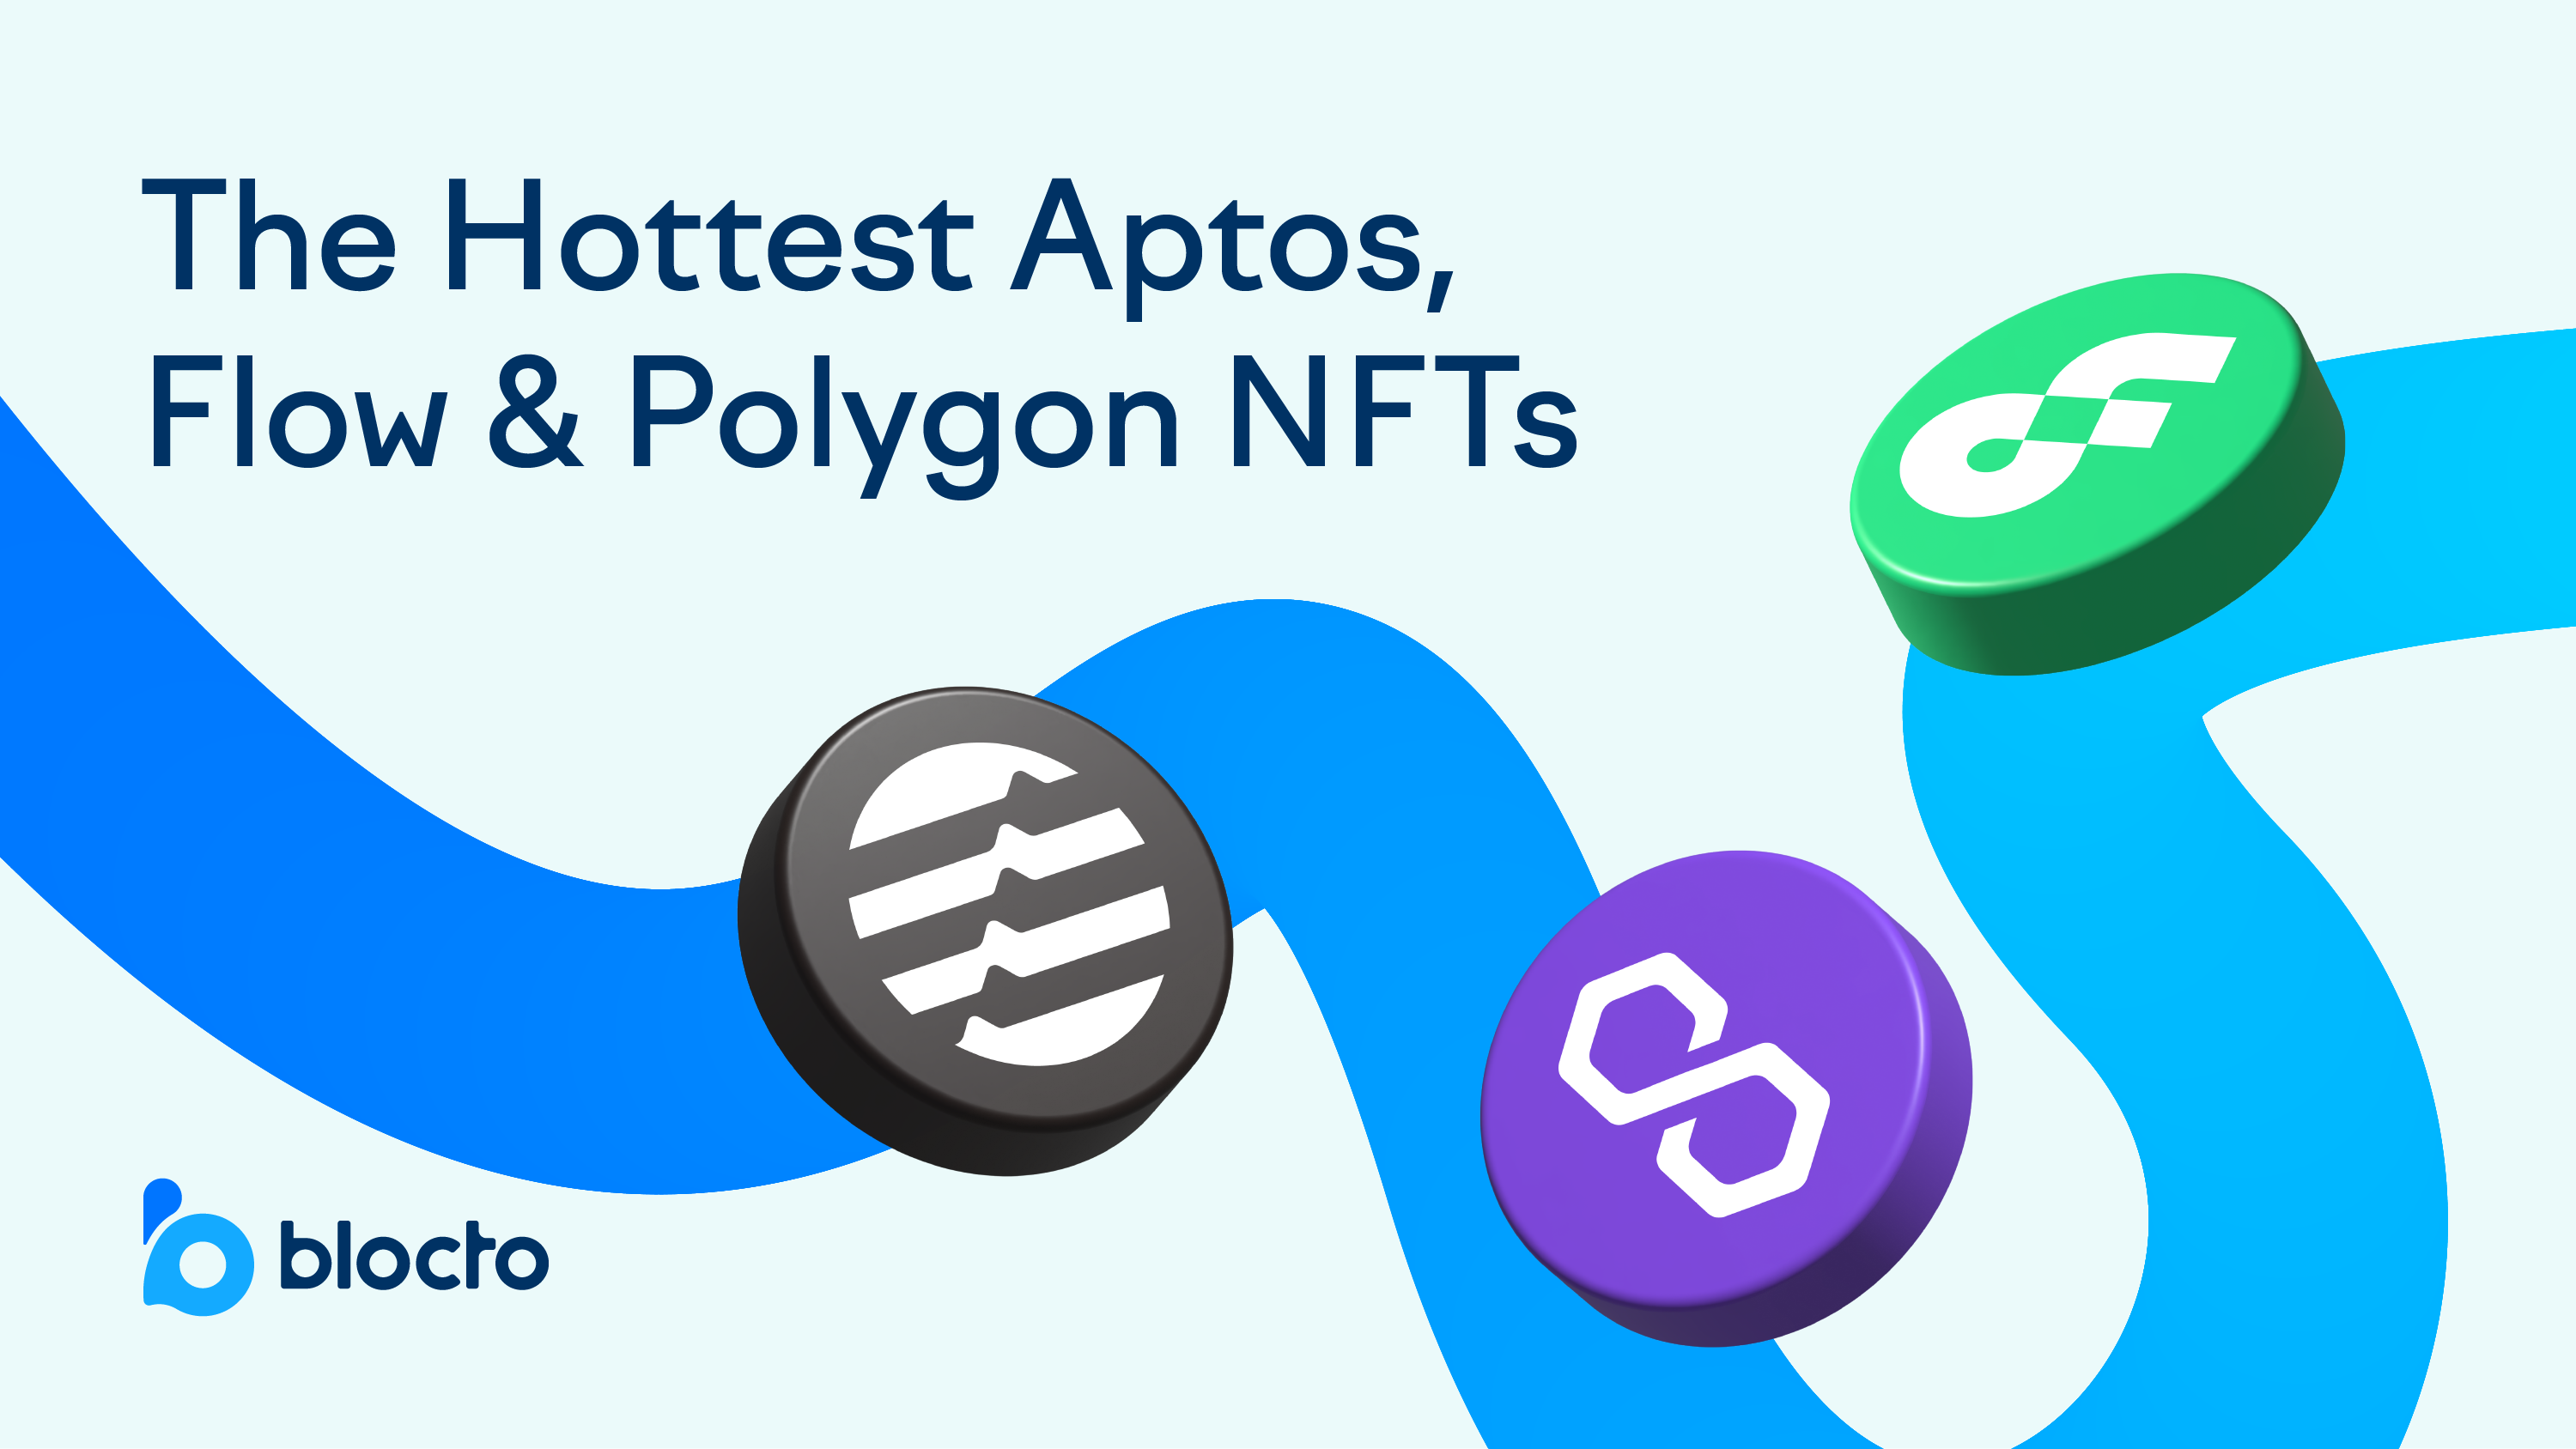 Top NFT projects on Aptos, Flow, Polygon